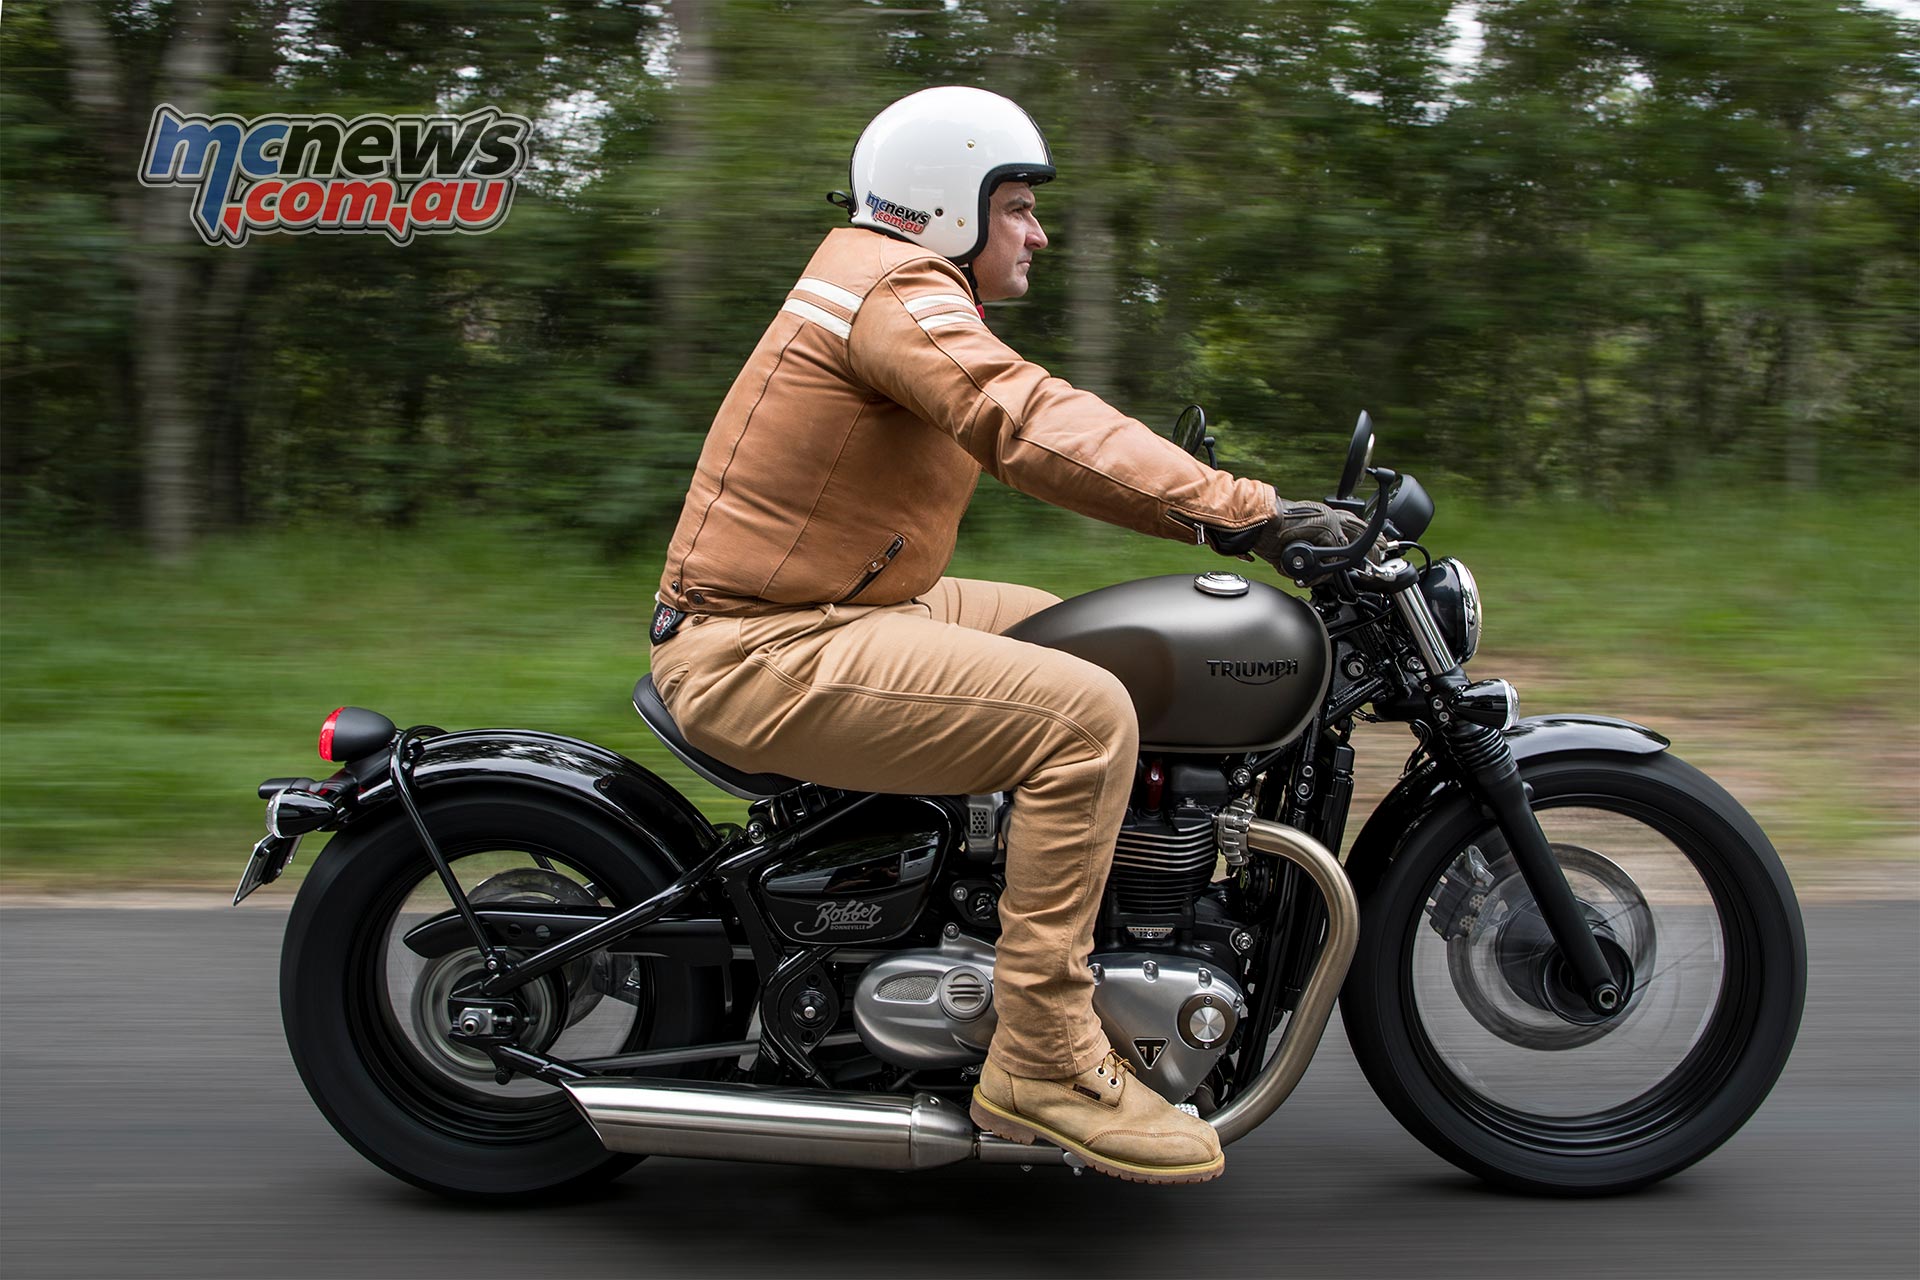 Triumph Bobber Review Does The Show Have Go Mcnews